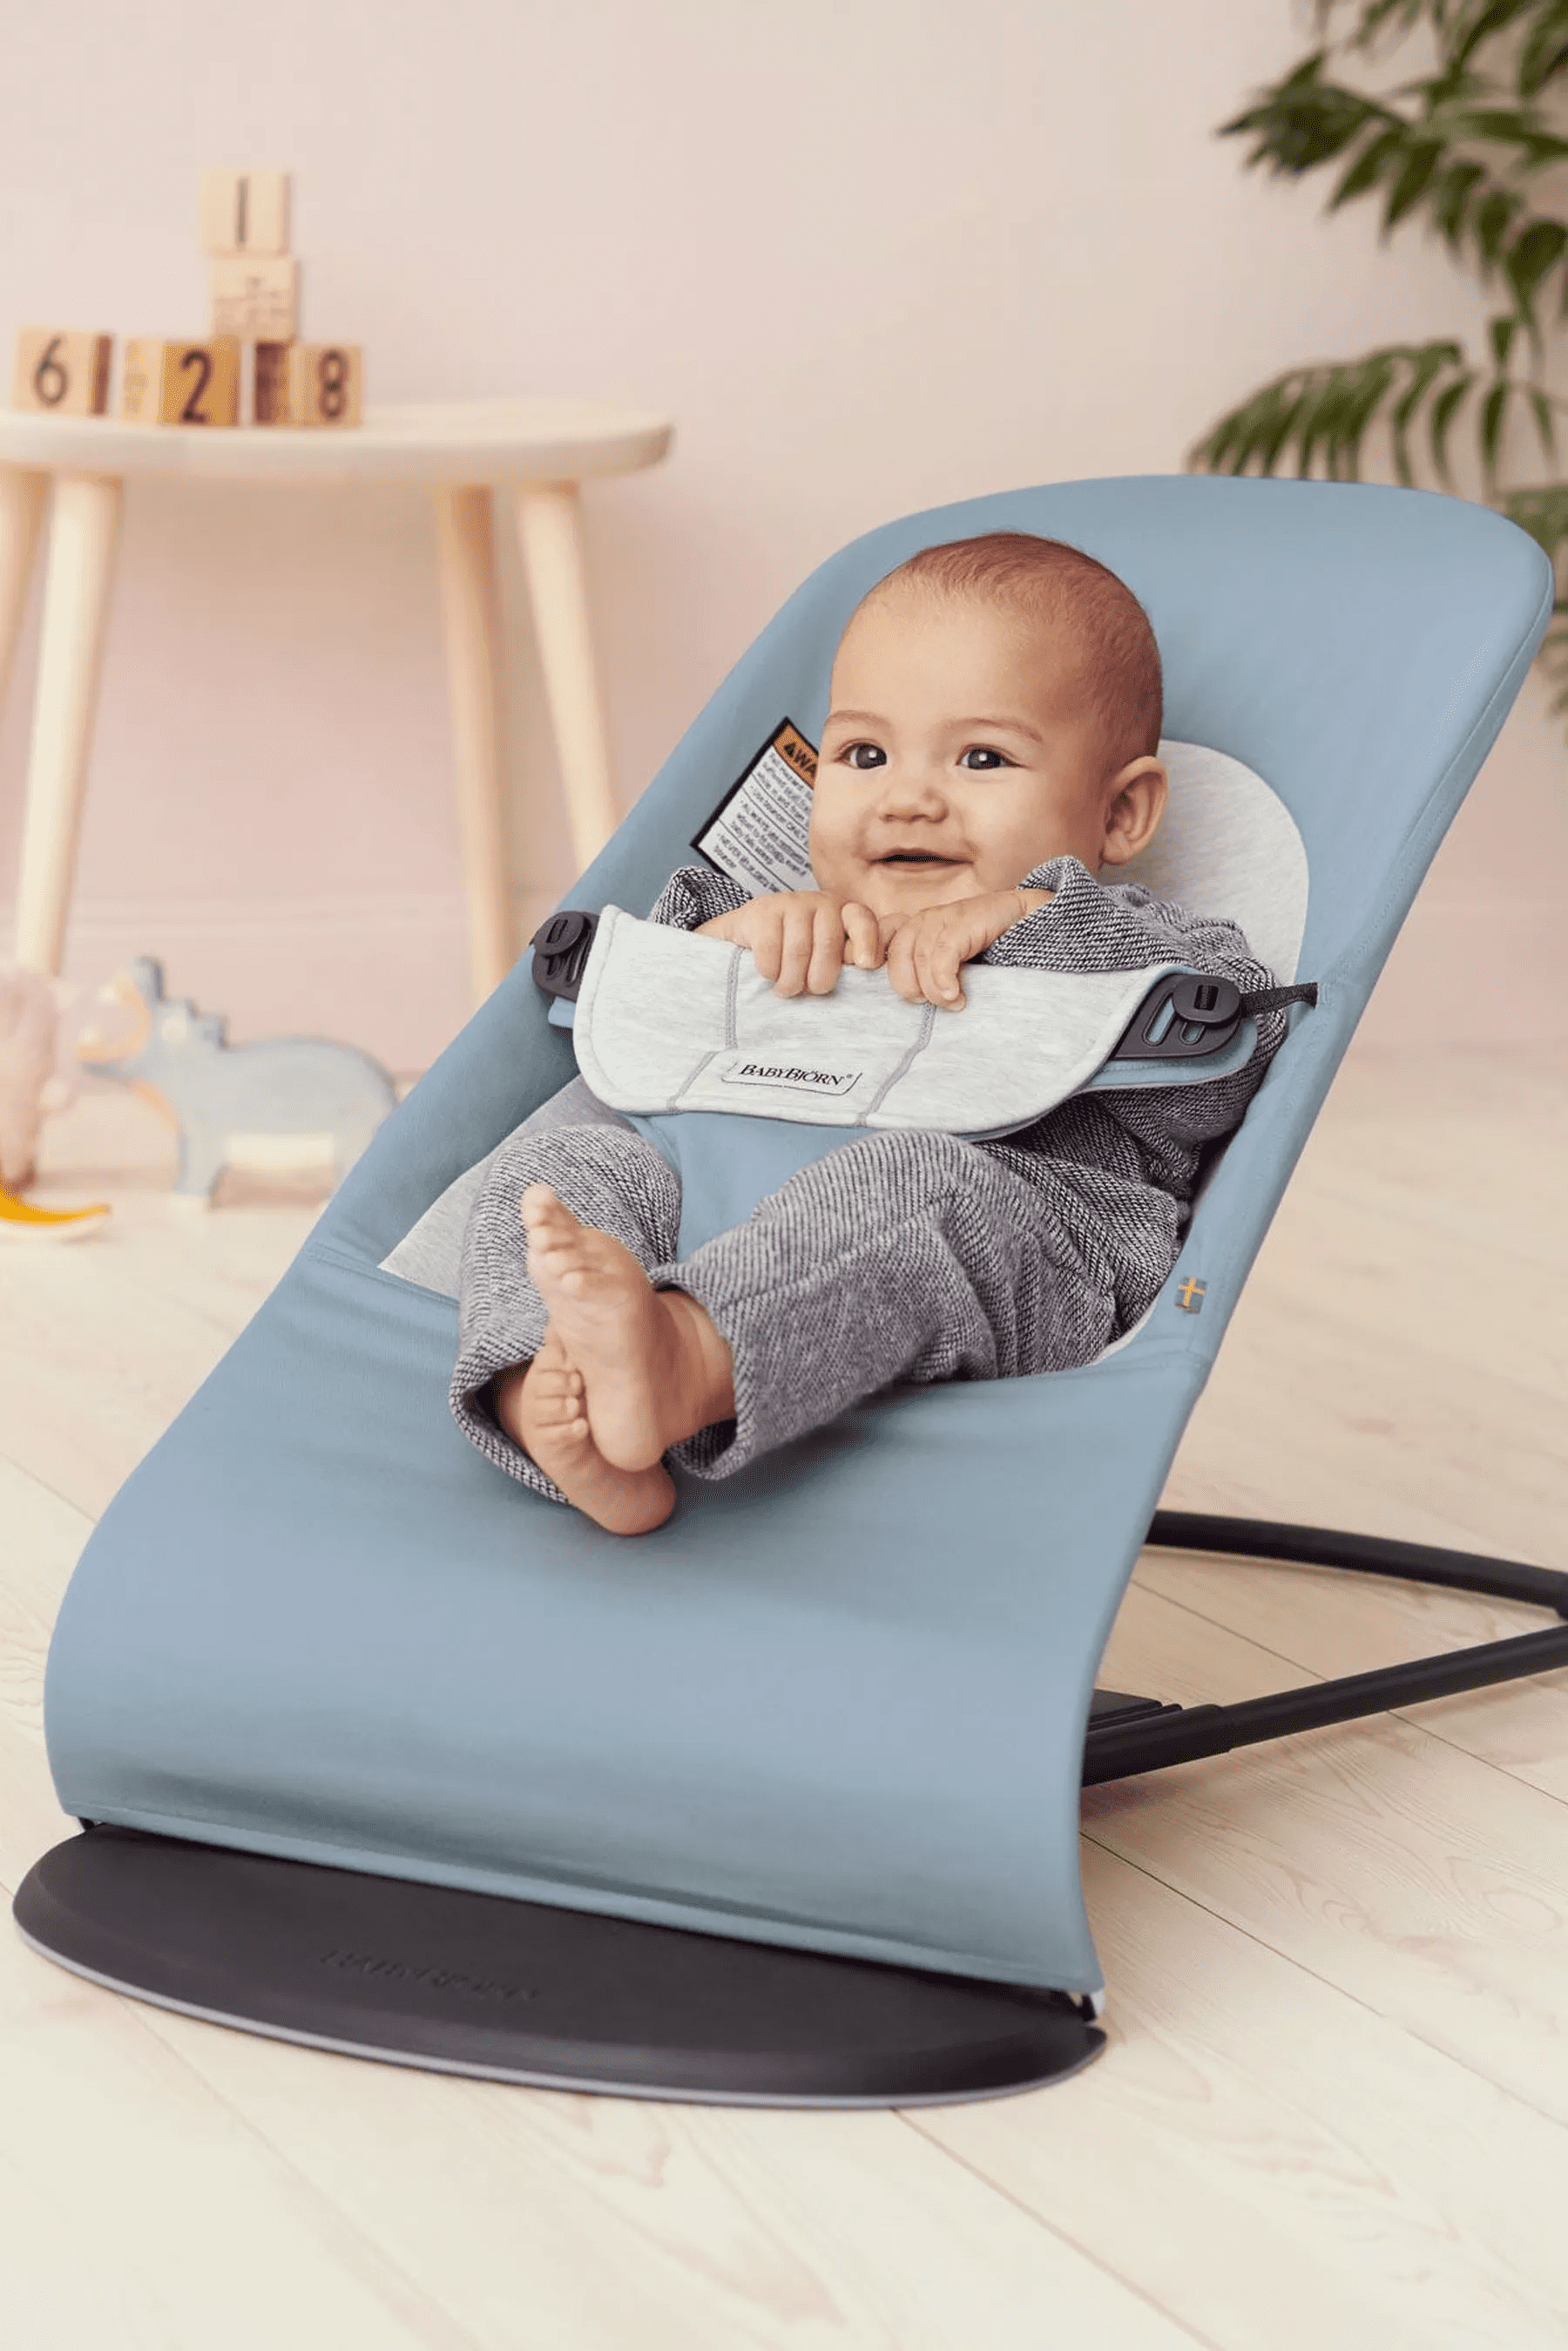 BabyBjorn Soft Balance Bouncer Review: It's a Baby Registry Must-Have!